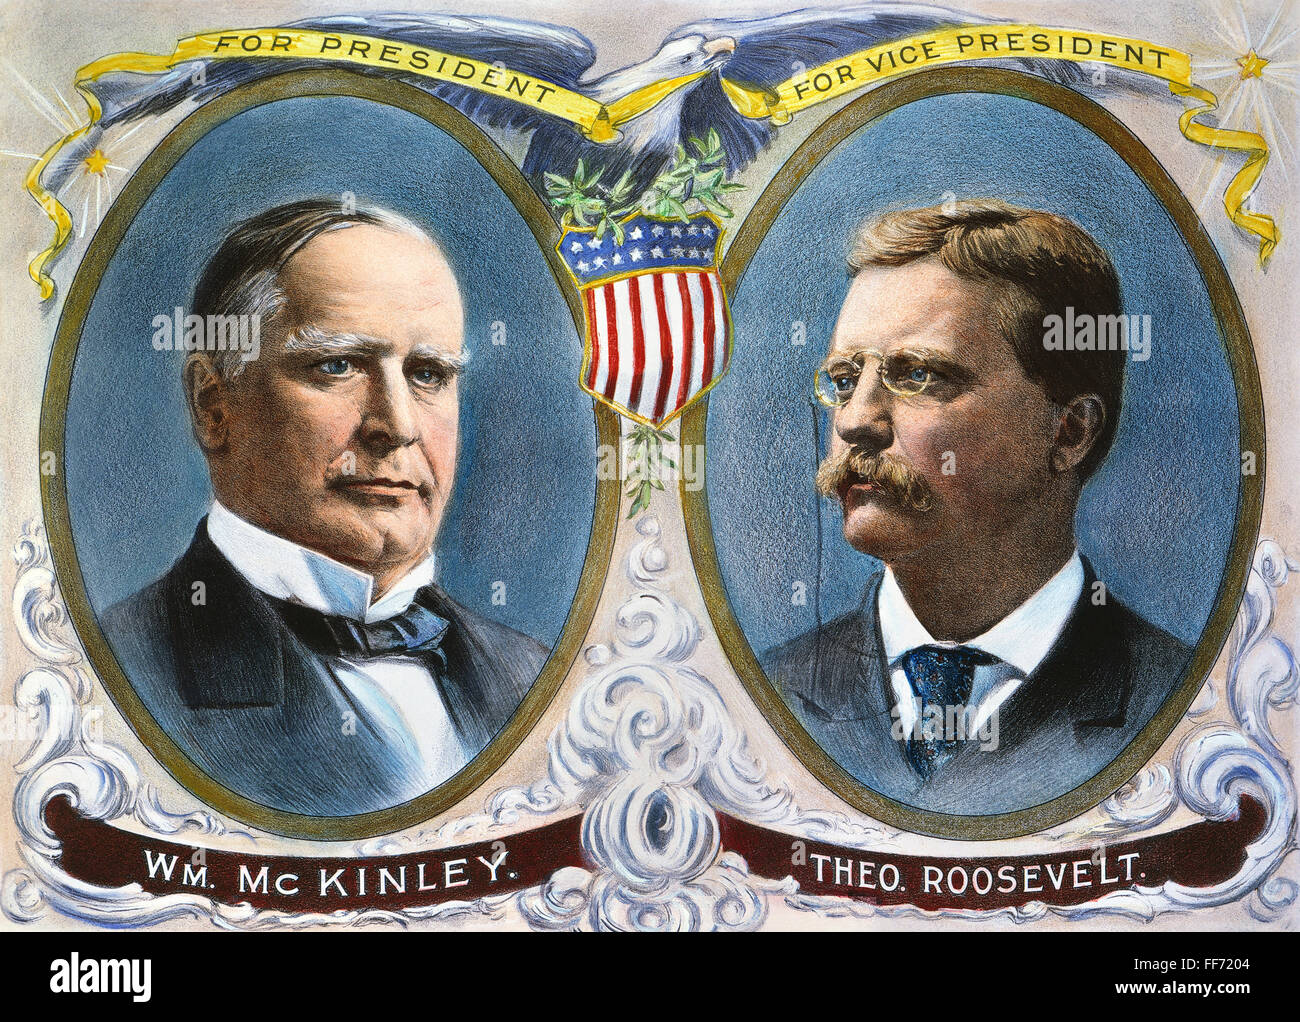 PRESIDENTIAL CAMPAIGN, 1900. /nWilliam McKinley and Theodore Roosevelt as the Republican candidates for President and Vice President on a lithograph campaign poster. Stock Photo